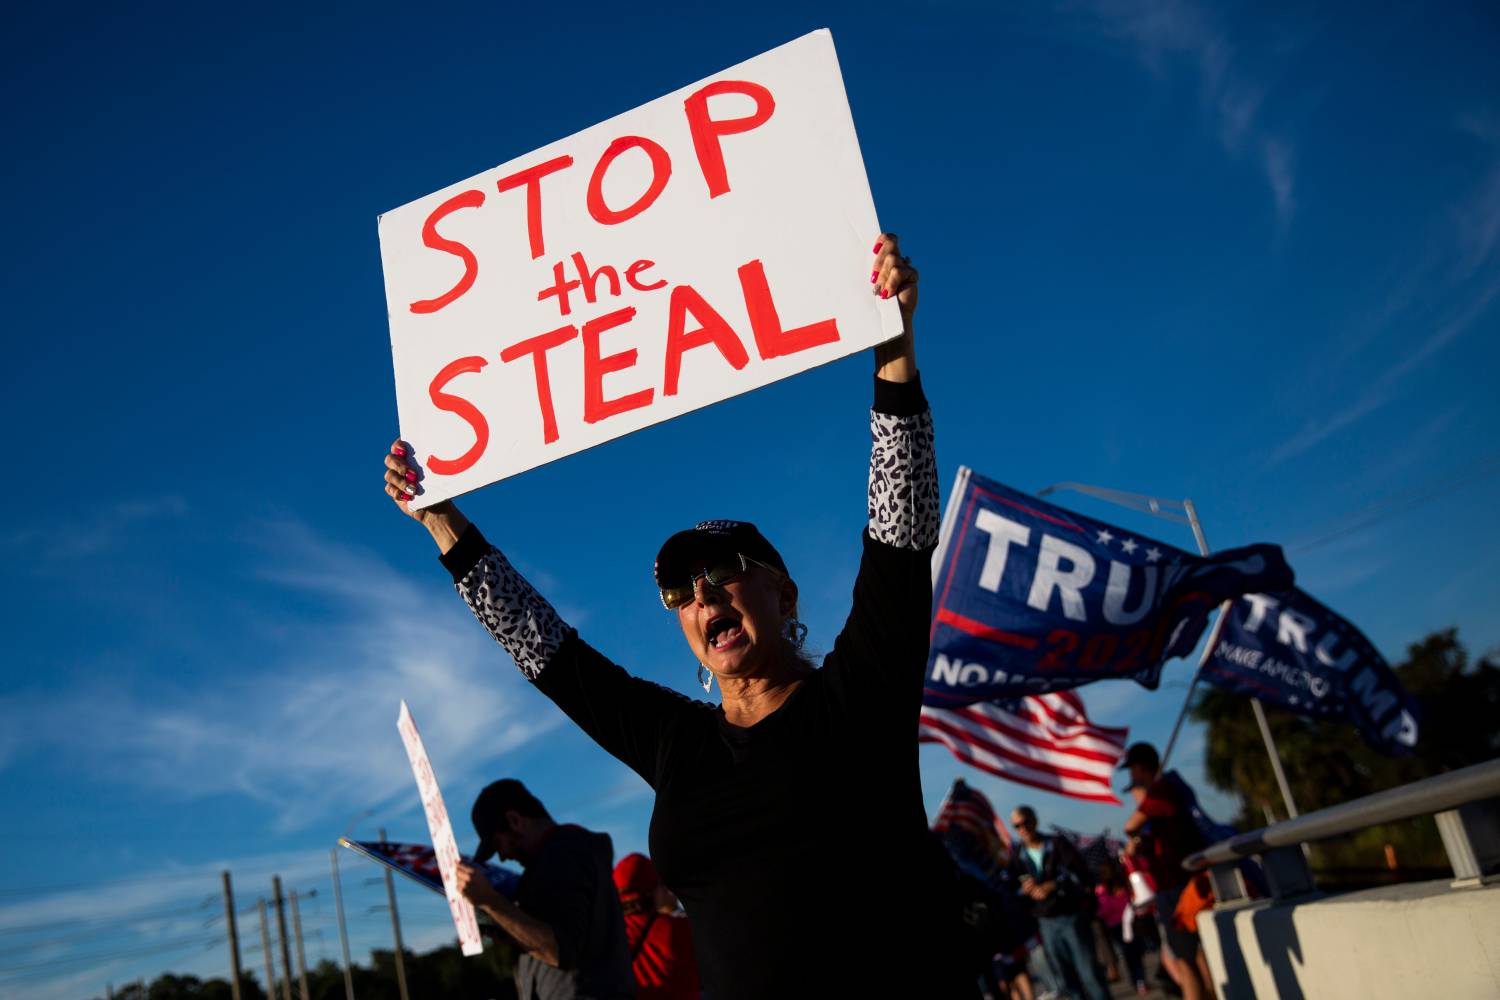 Diane "Feisty" Feist holds up a sign that says "stop the steal" during a pro-Trump protest outside Oakes Farms Seed to Table in North Naples on Wednesday, January 6, 2021.Ndn Best Of January 001